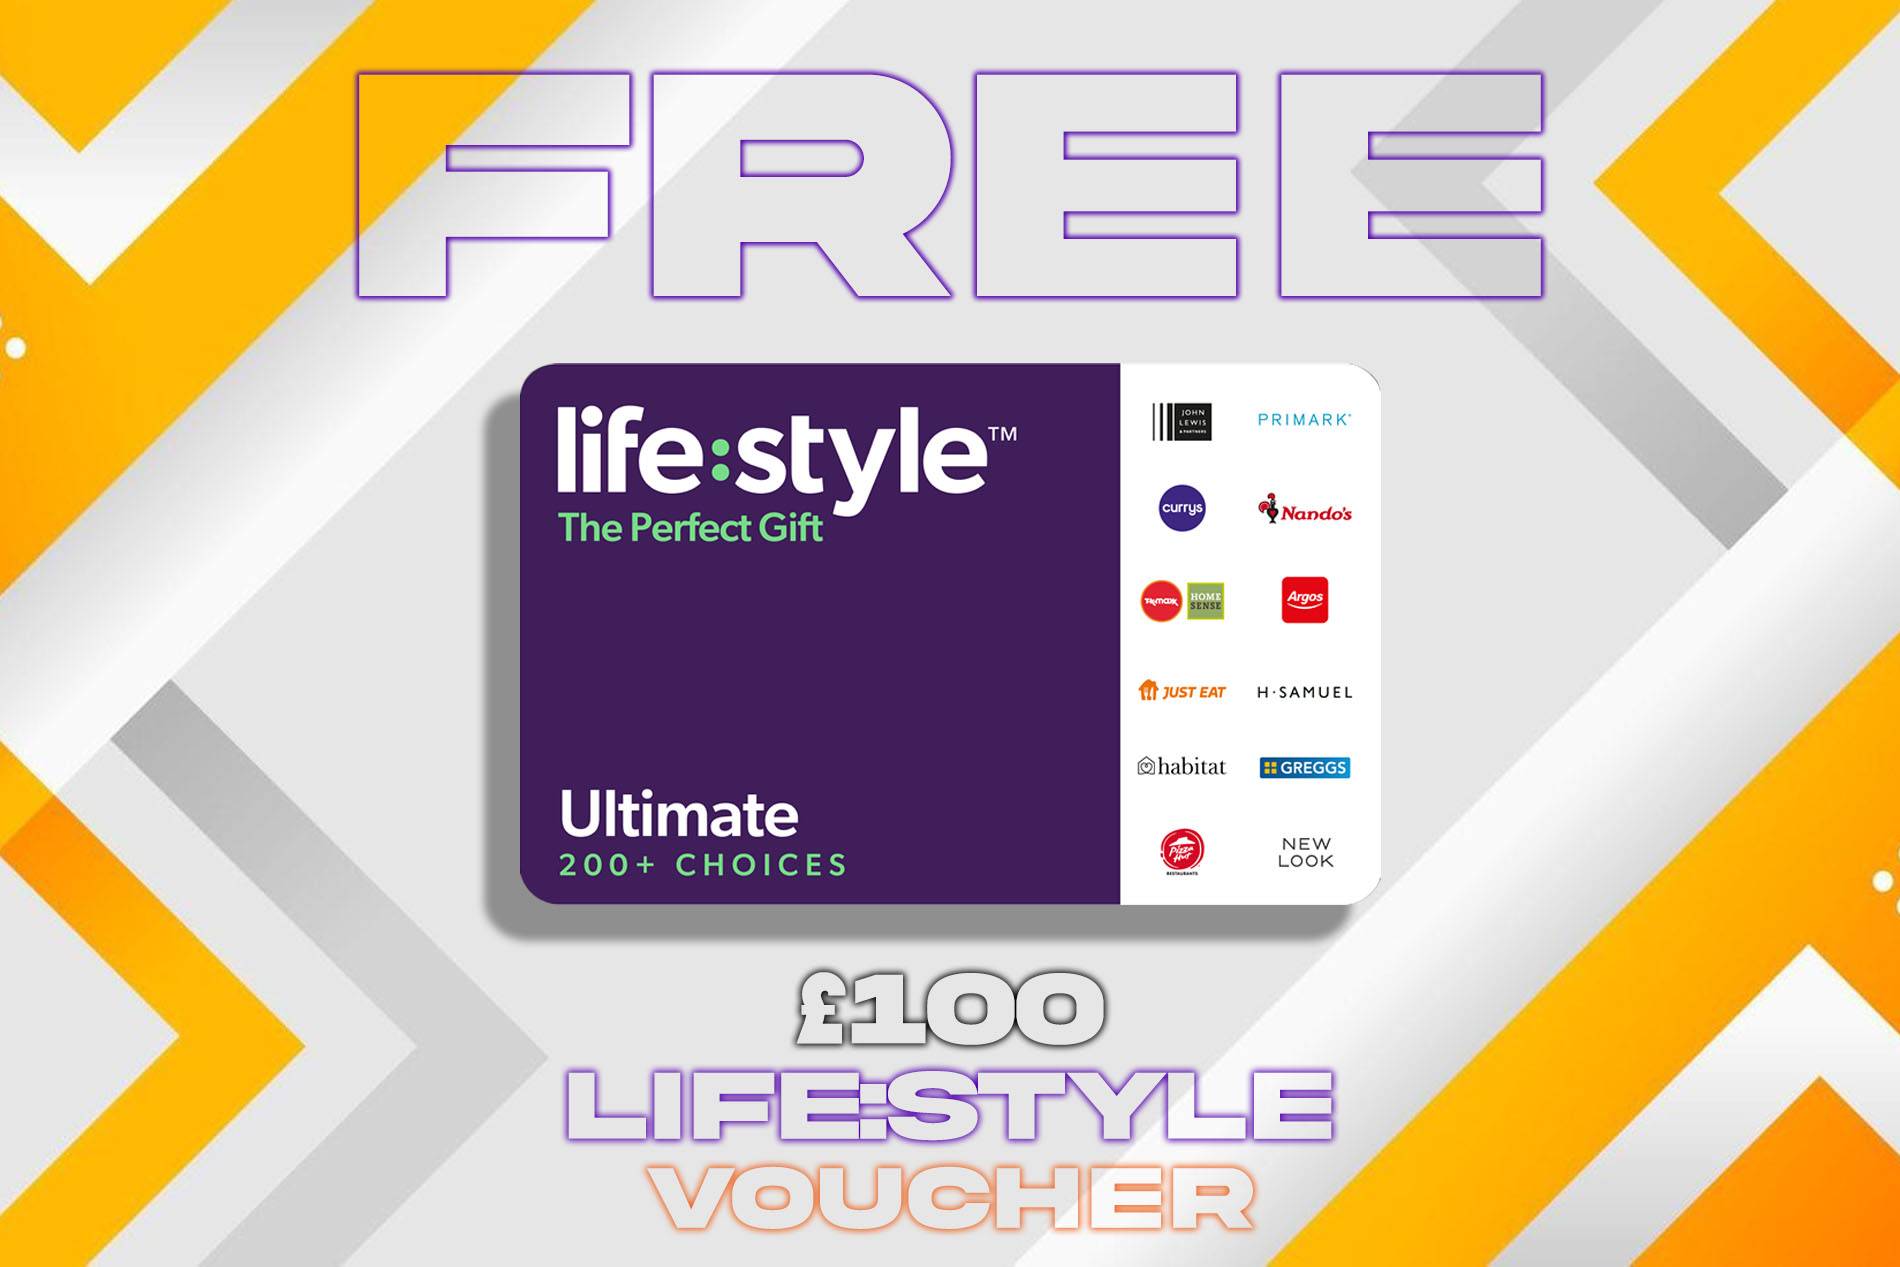 FREE: Chance to Win £100 Life Style Voucher (Prize Tripled Over £1 Spend)